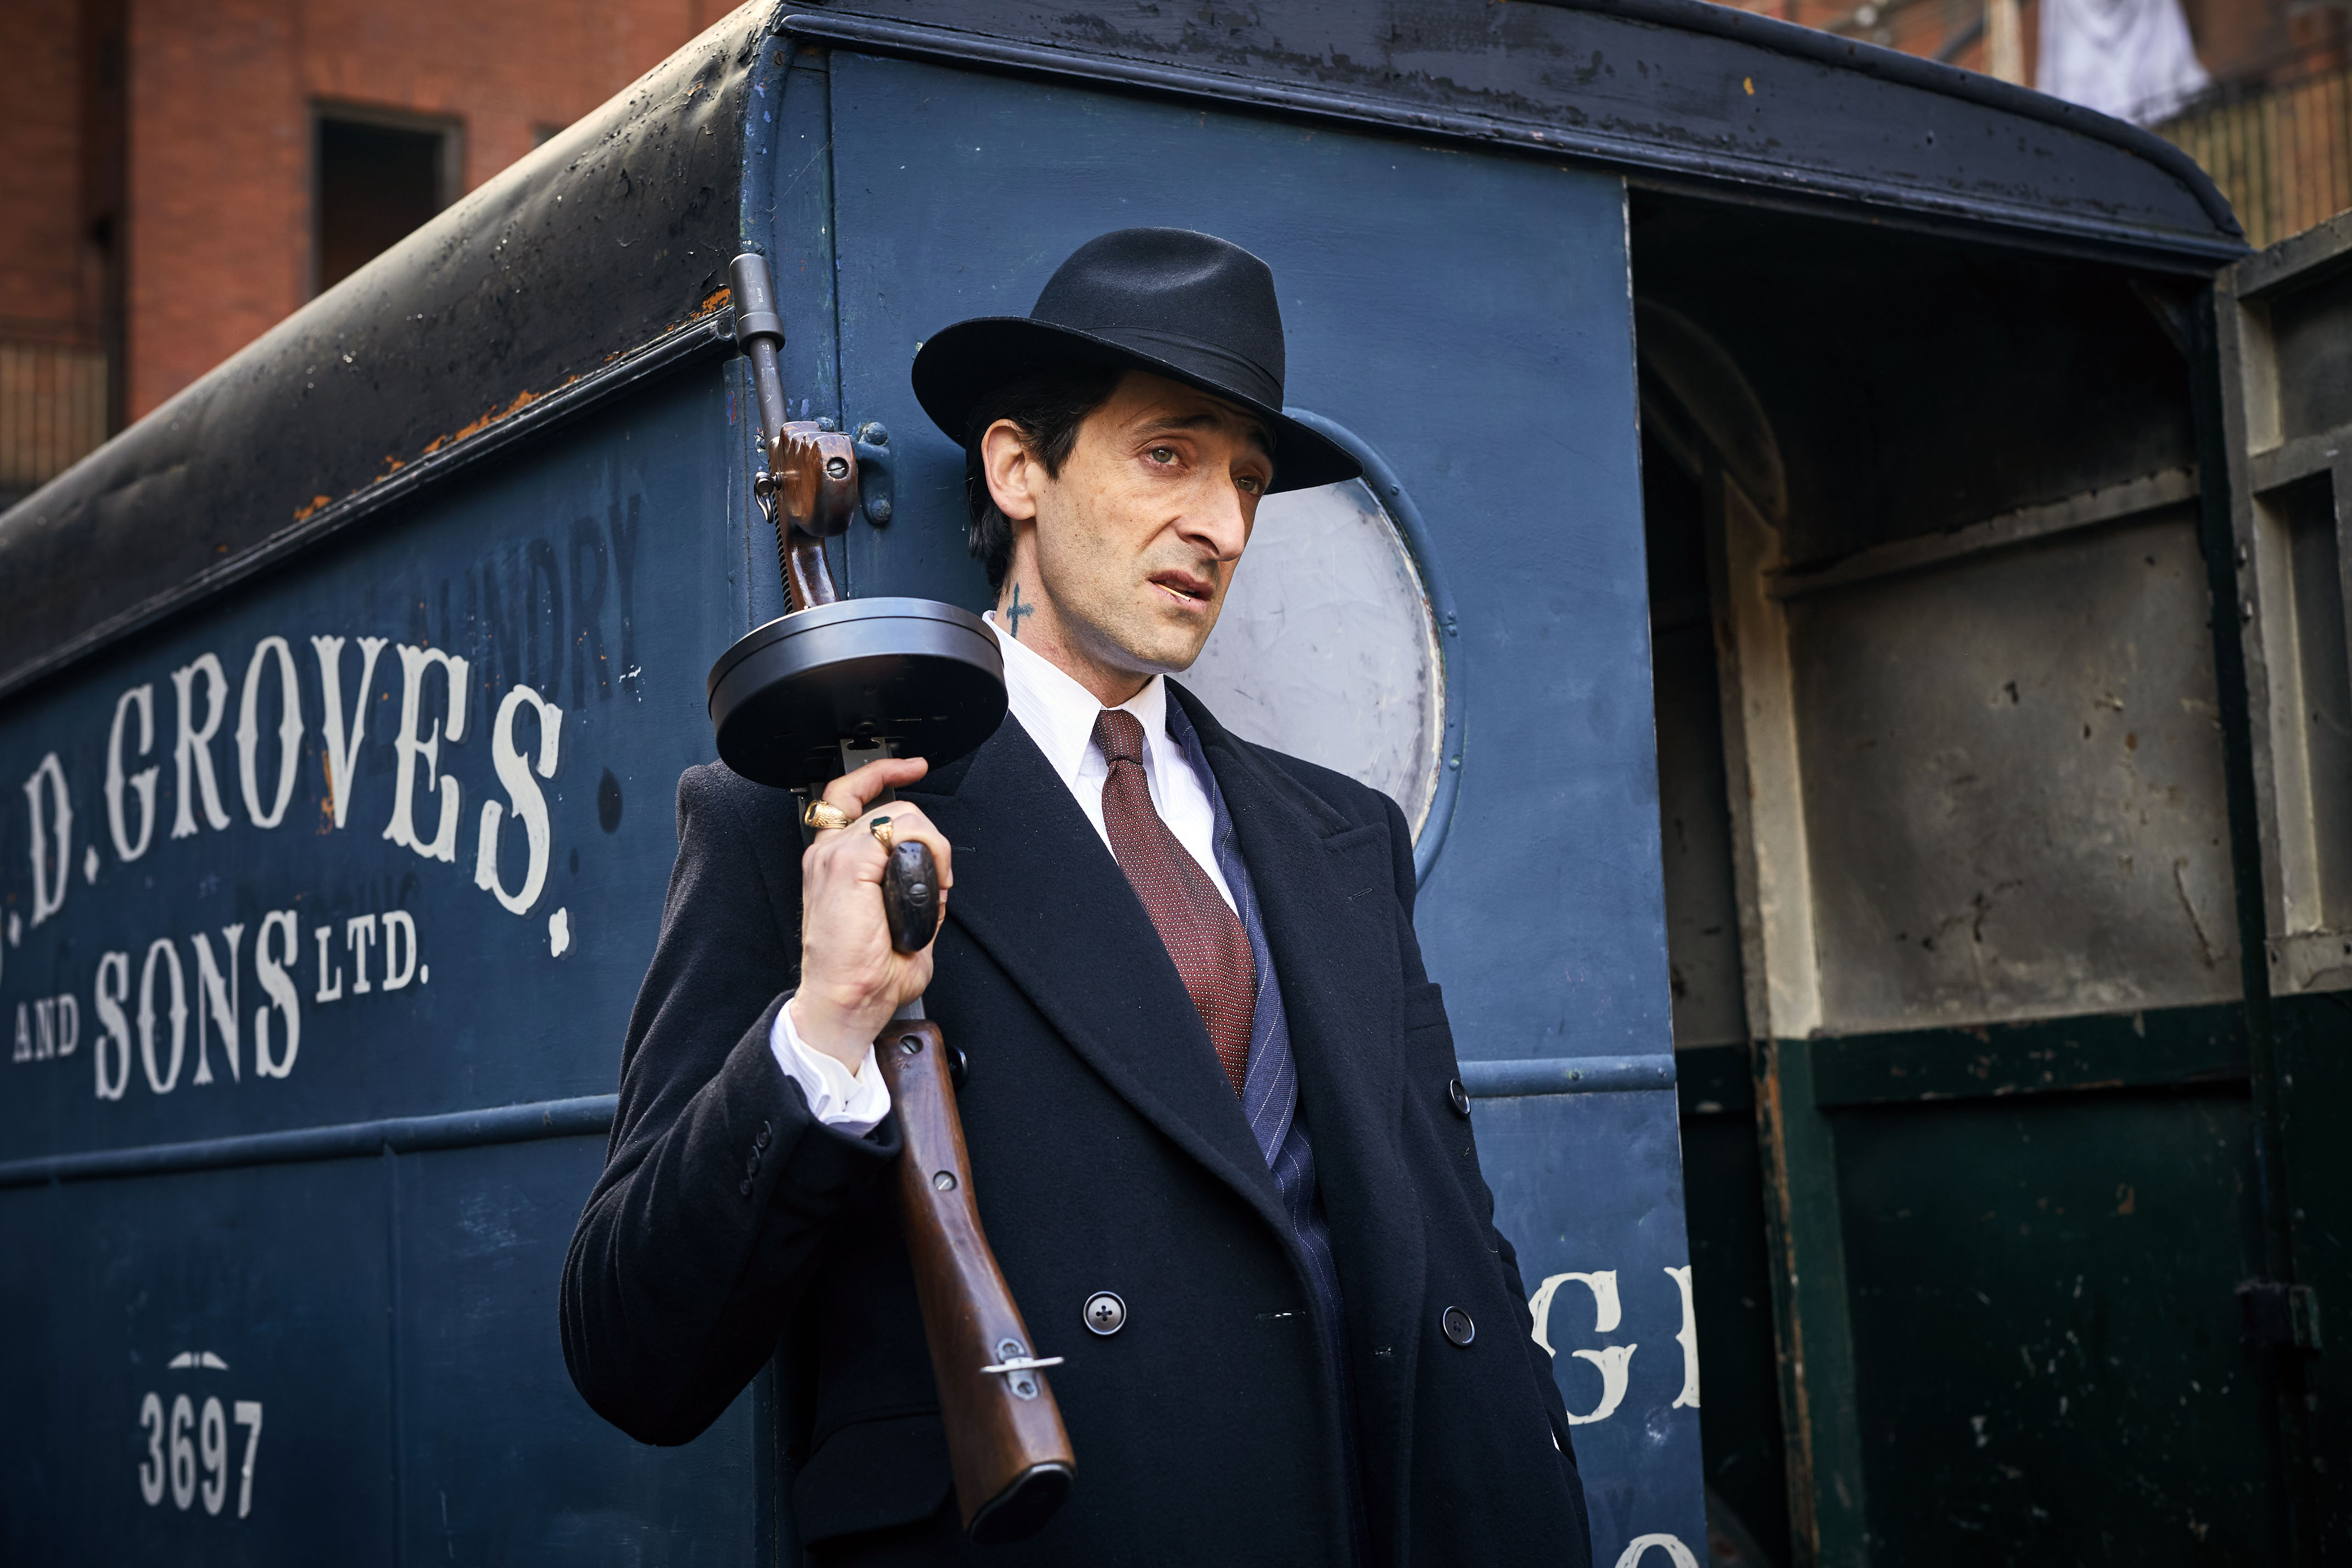 Download wallpaper for 320x240 resolution | Adrien Brody tv series Peaky  Blinders Luca Changretta tommy gun | other | Wallpaper Better